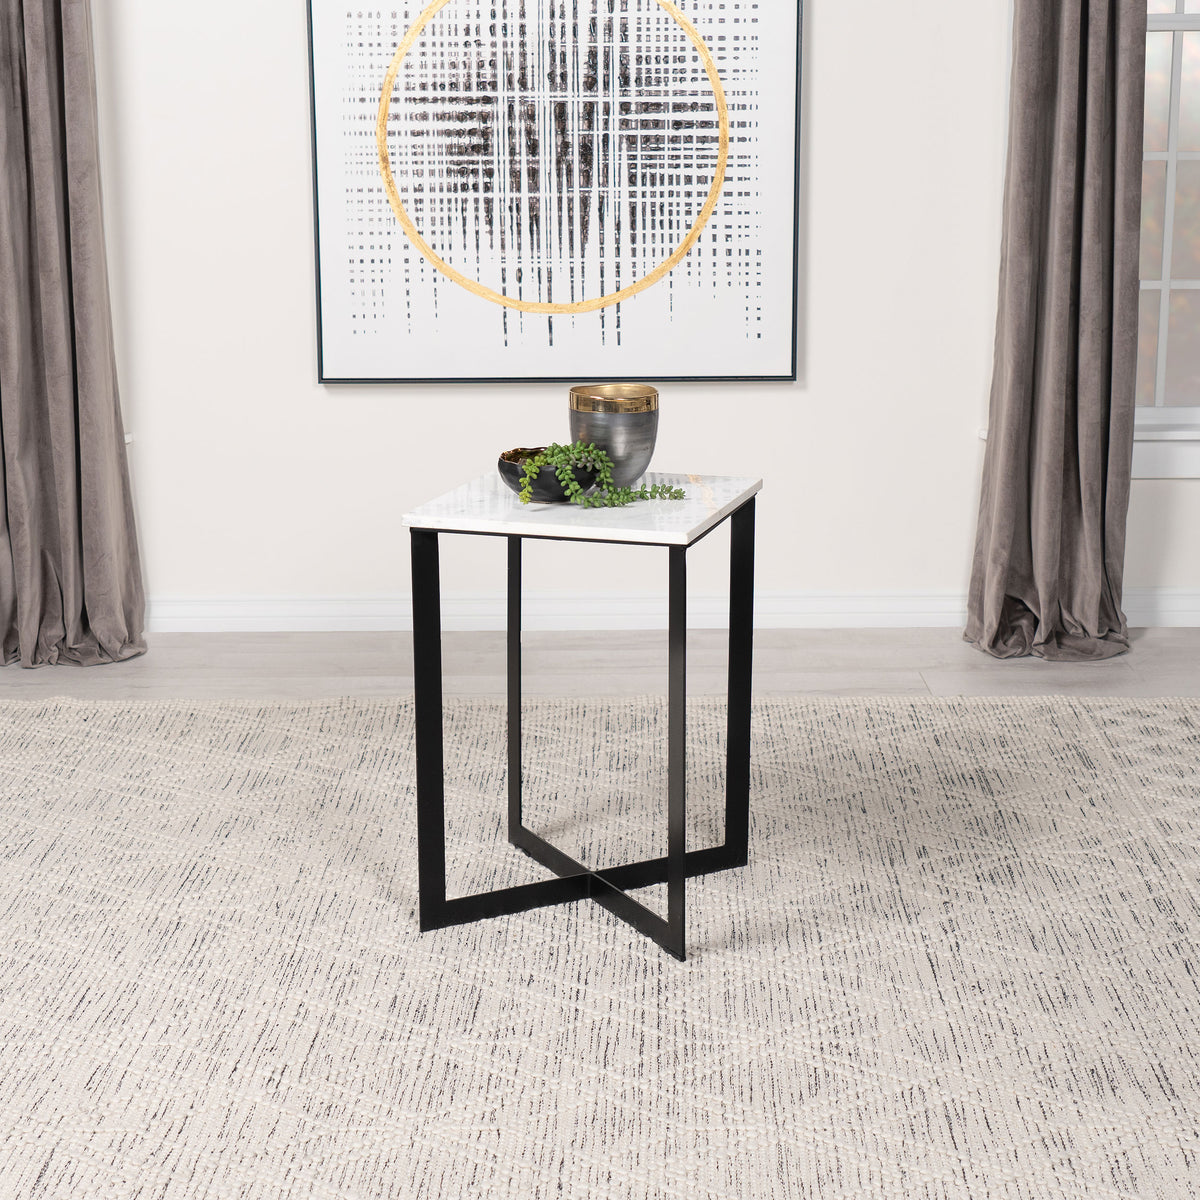 Tobin Square Marble Top End Table White and Black  Half Price Furniture